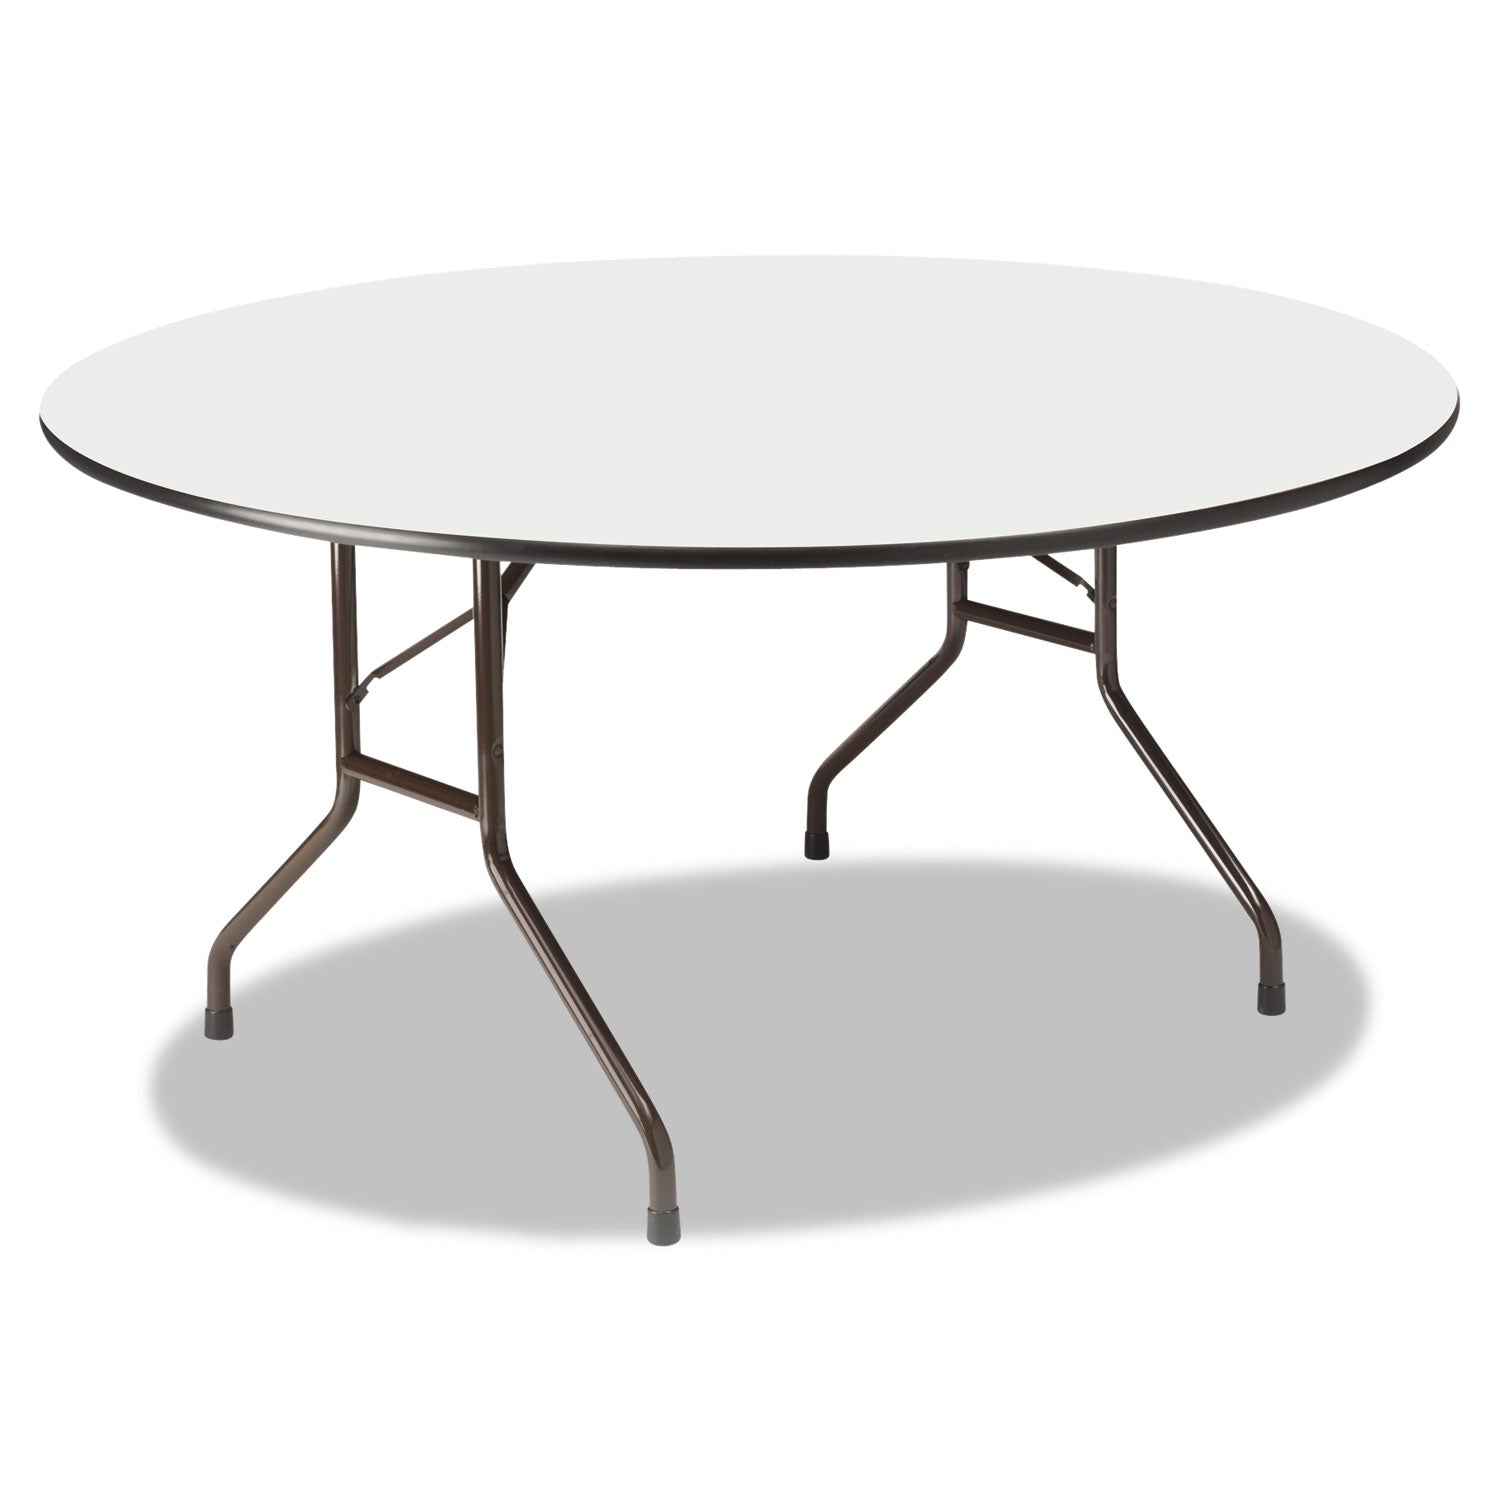 OfficeWorks Wood Folding Table, Round, 60" x 29", Gray Top, Charcoal Base - 